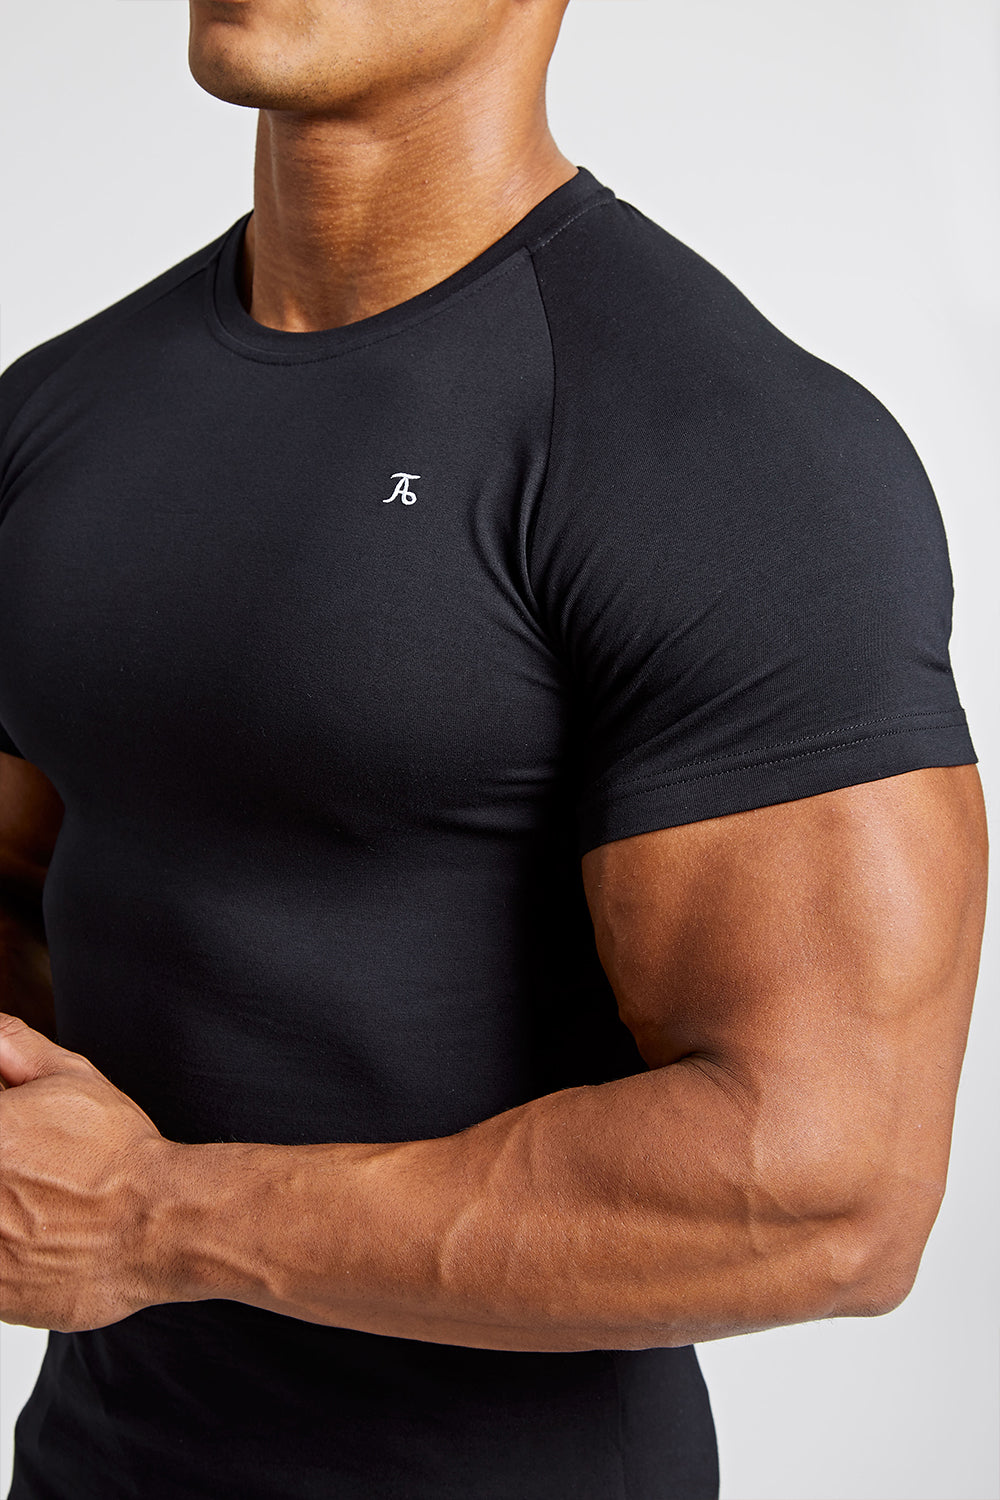 Premium Muscle Fit T-Shirt in Black - TAILORED ATHLETE - ROW